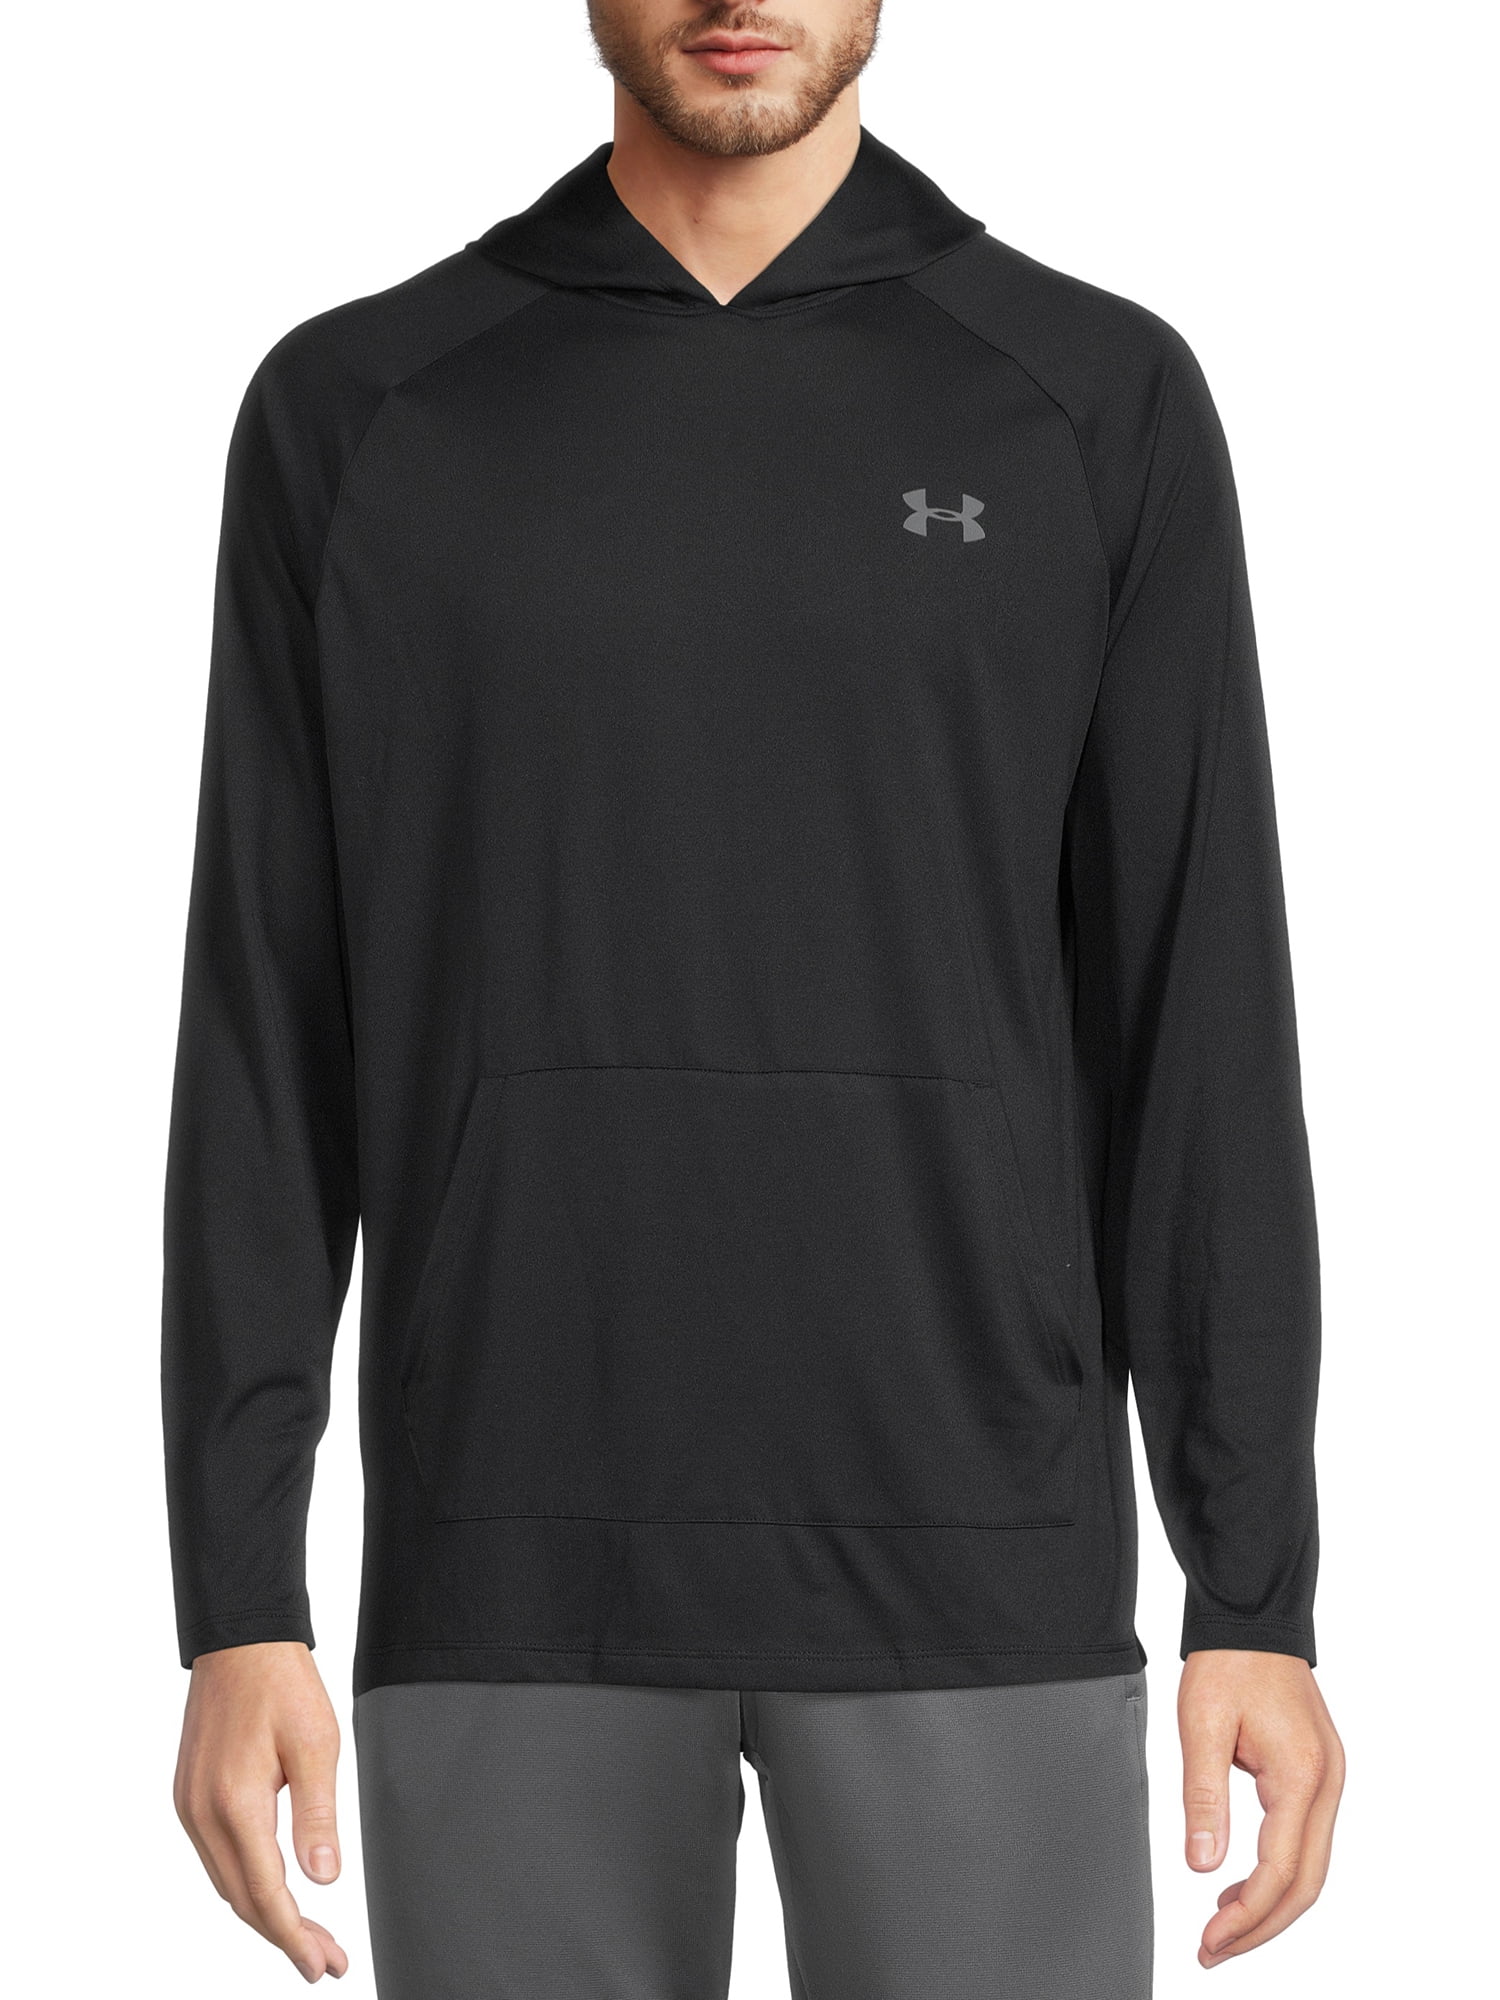 Under Armour Mens Tech 2.0 Hoodie Black Sports Gym Hooded Breathable Lightweight 